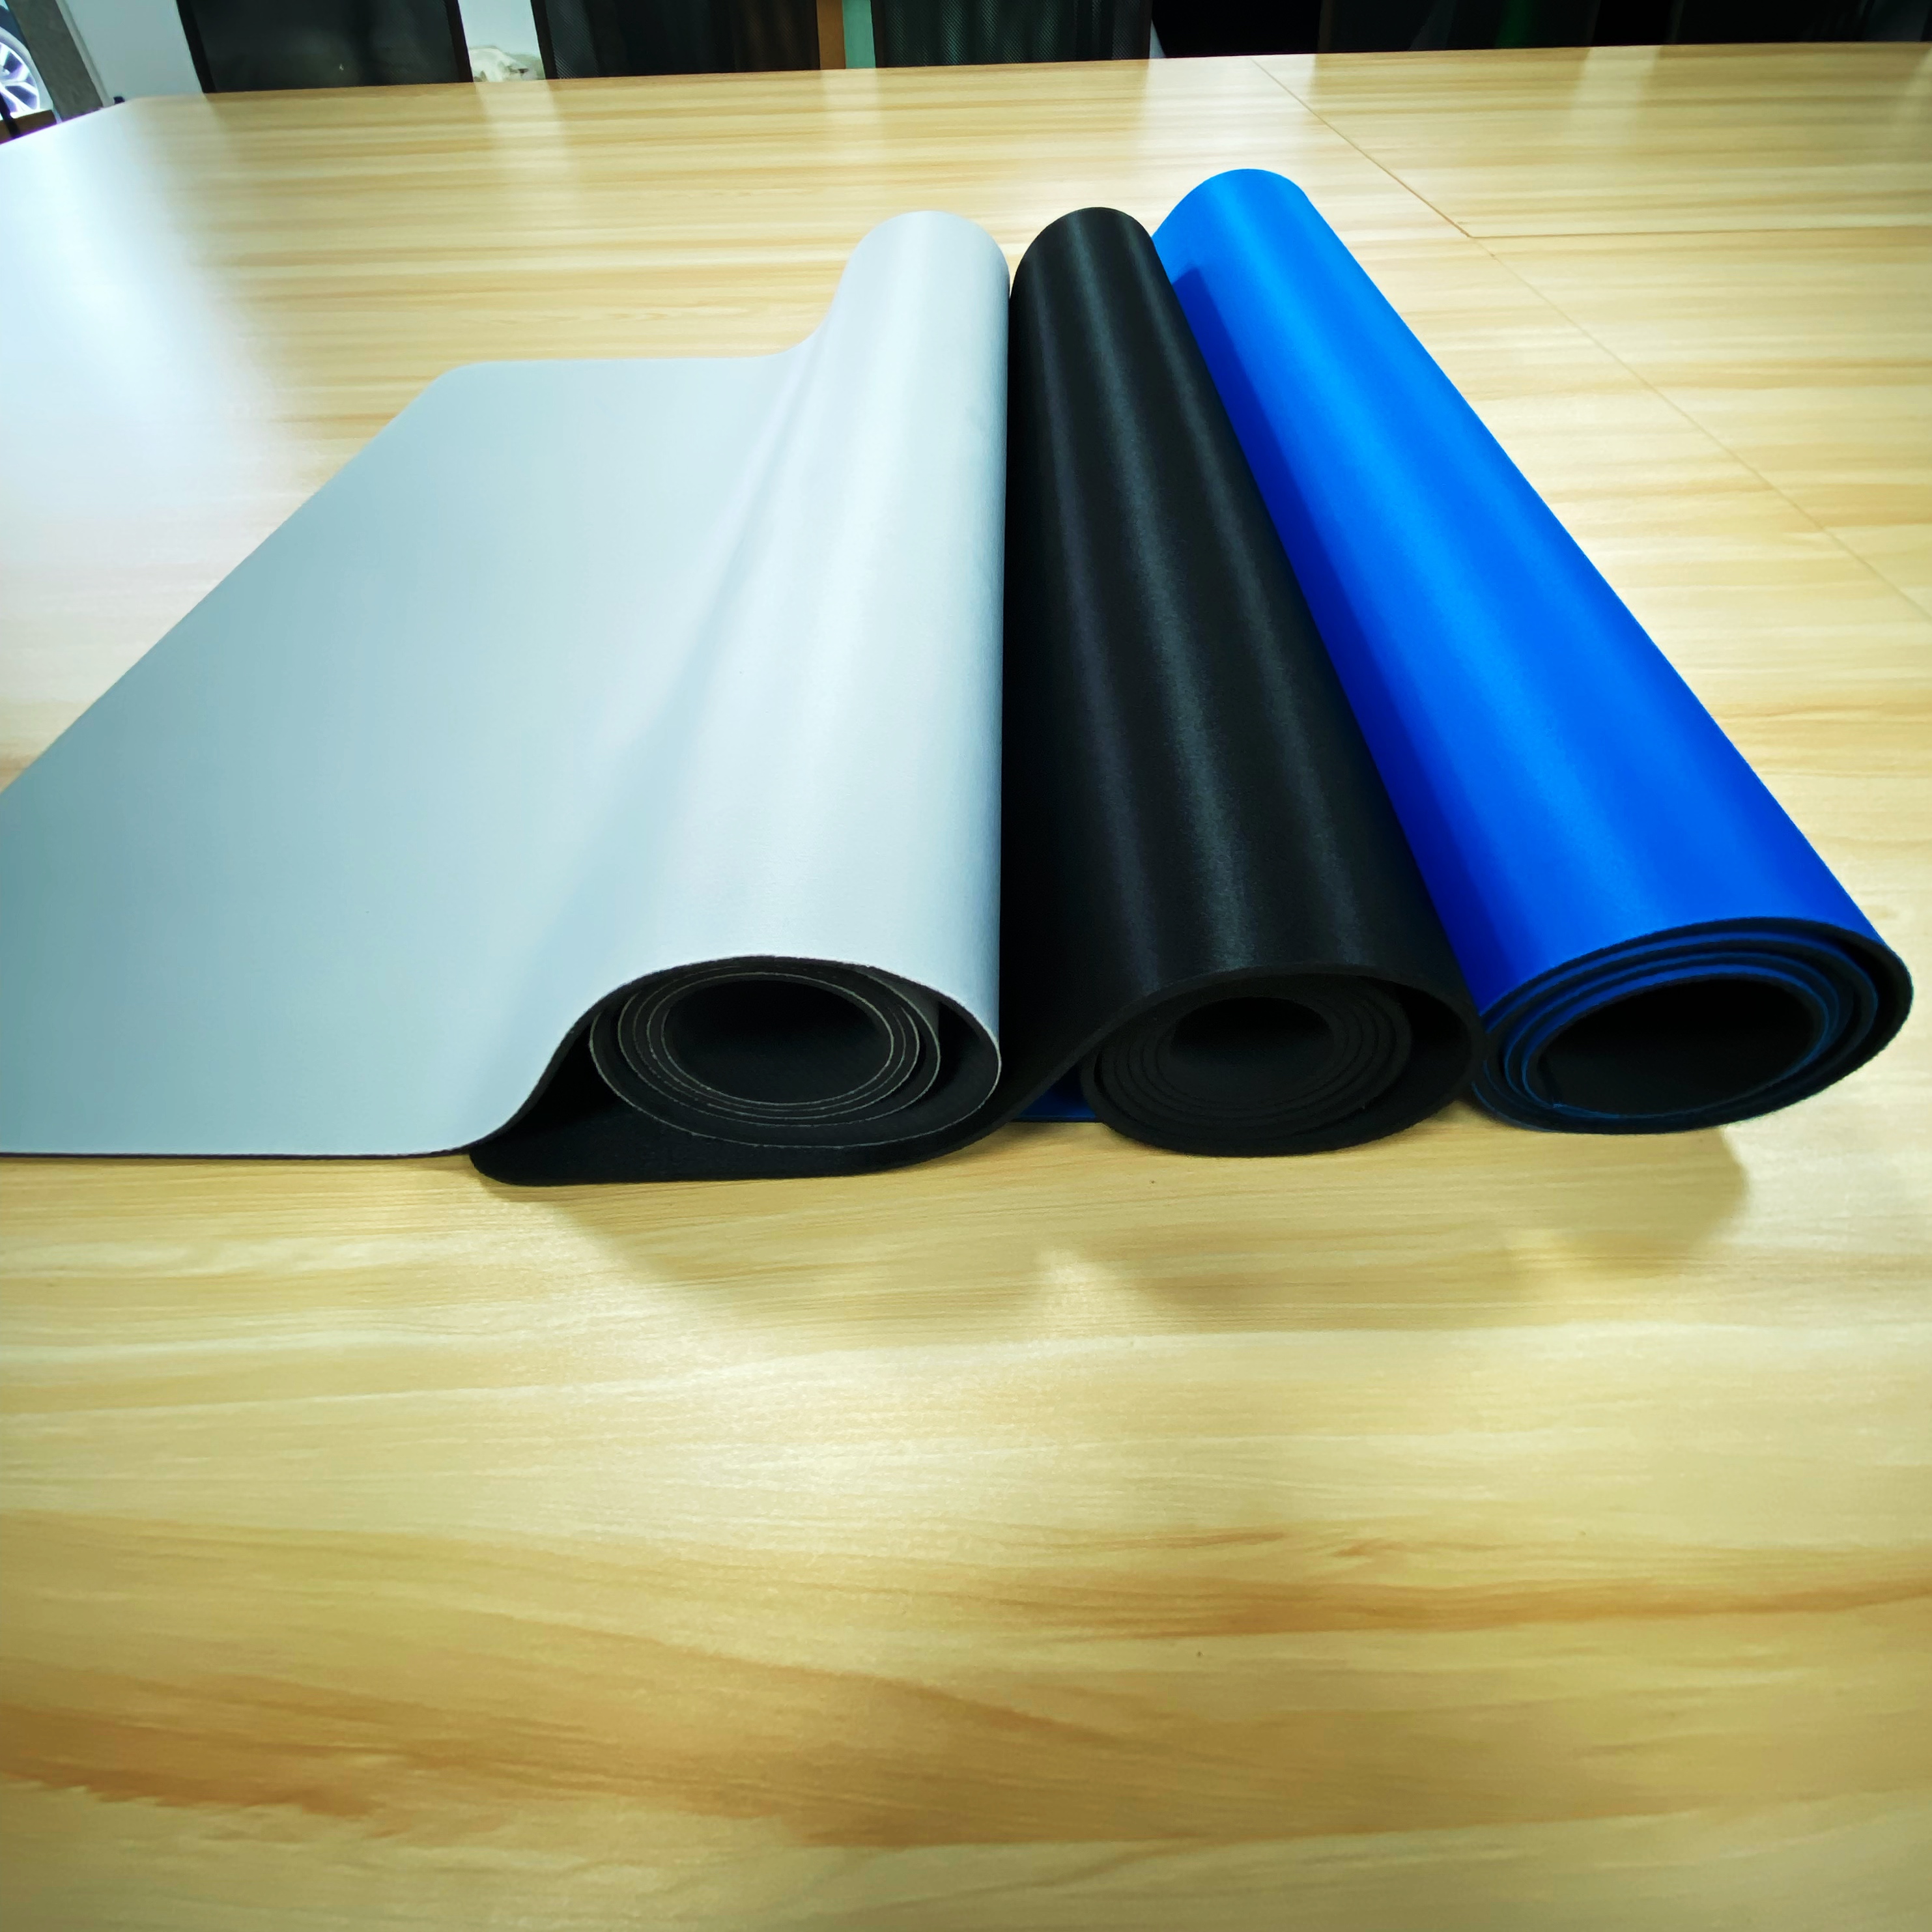 Blank rubber materials for yoga mats